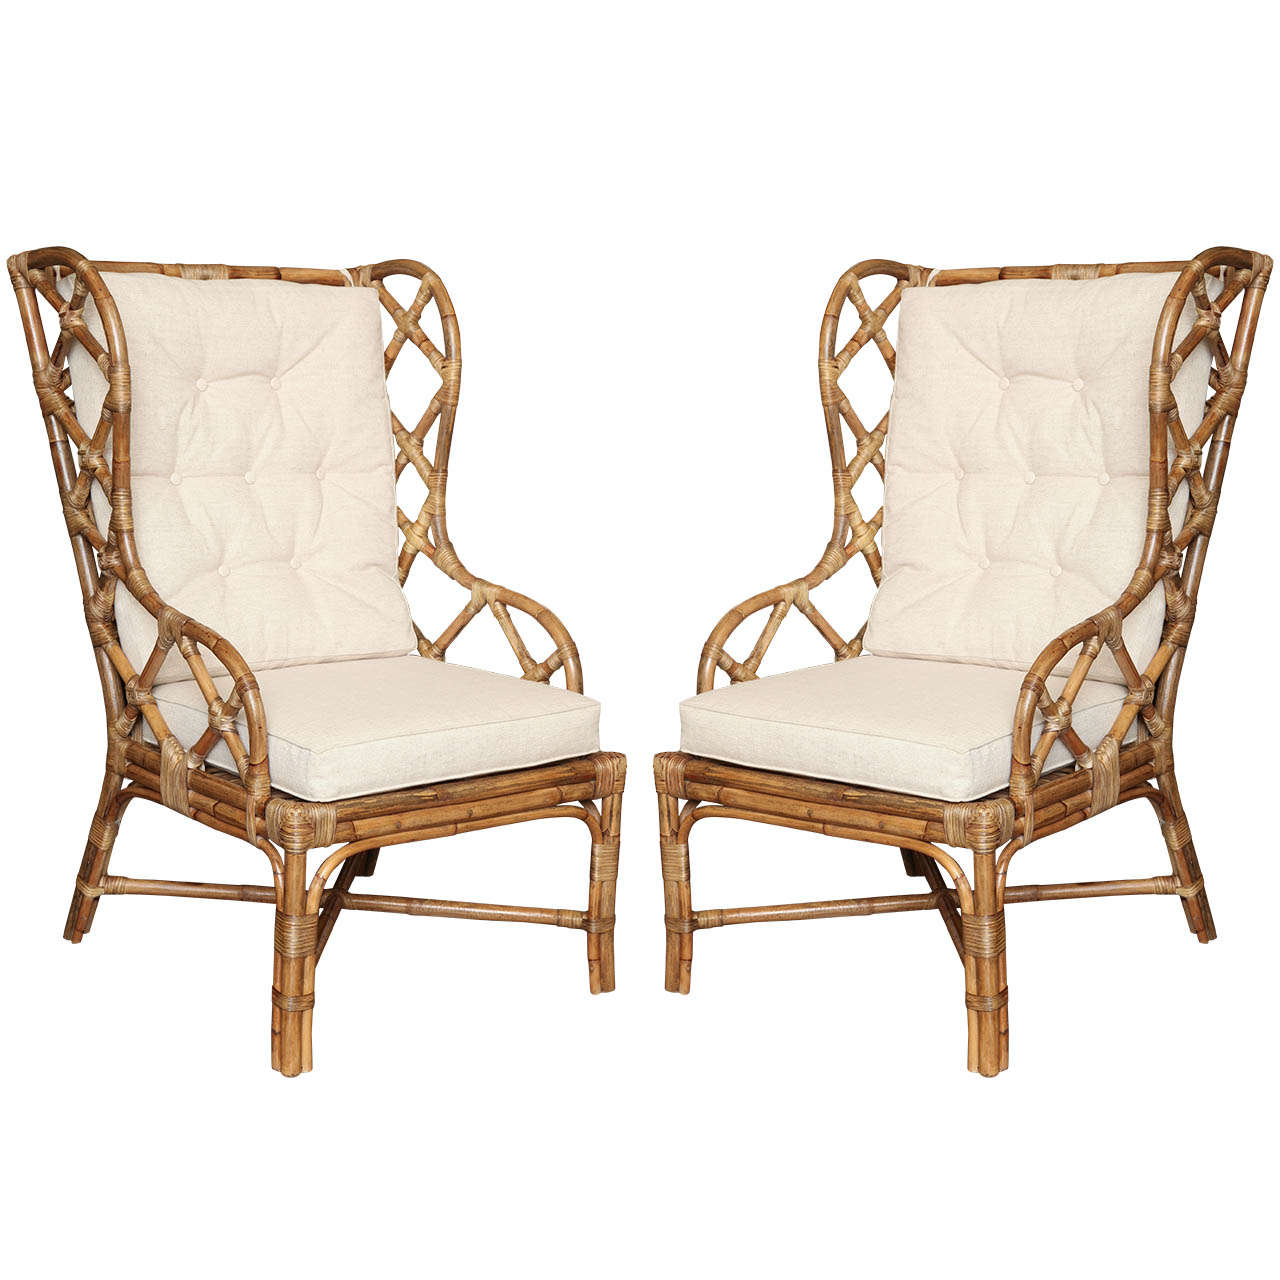 Pair Of Rattan Wingback Chairs, c. 1960